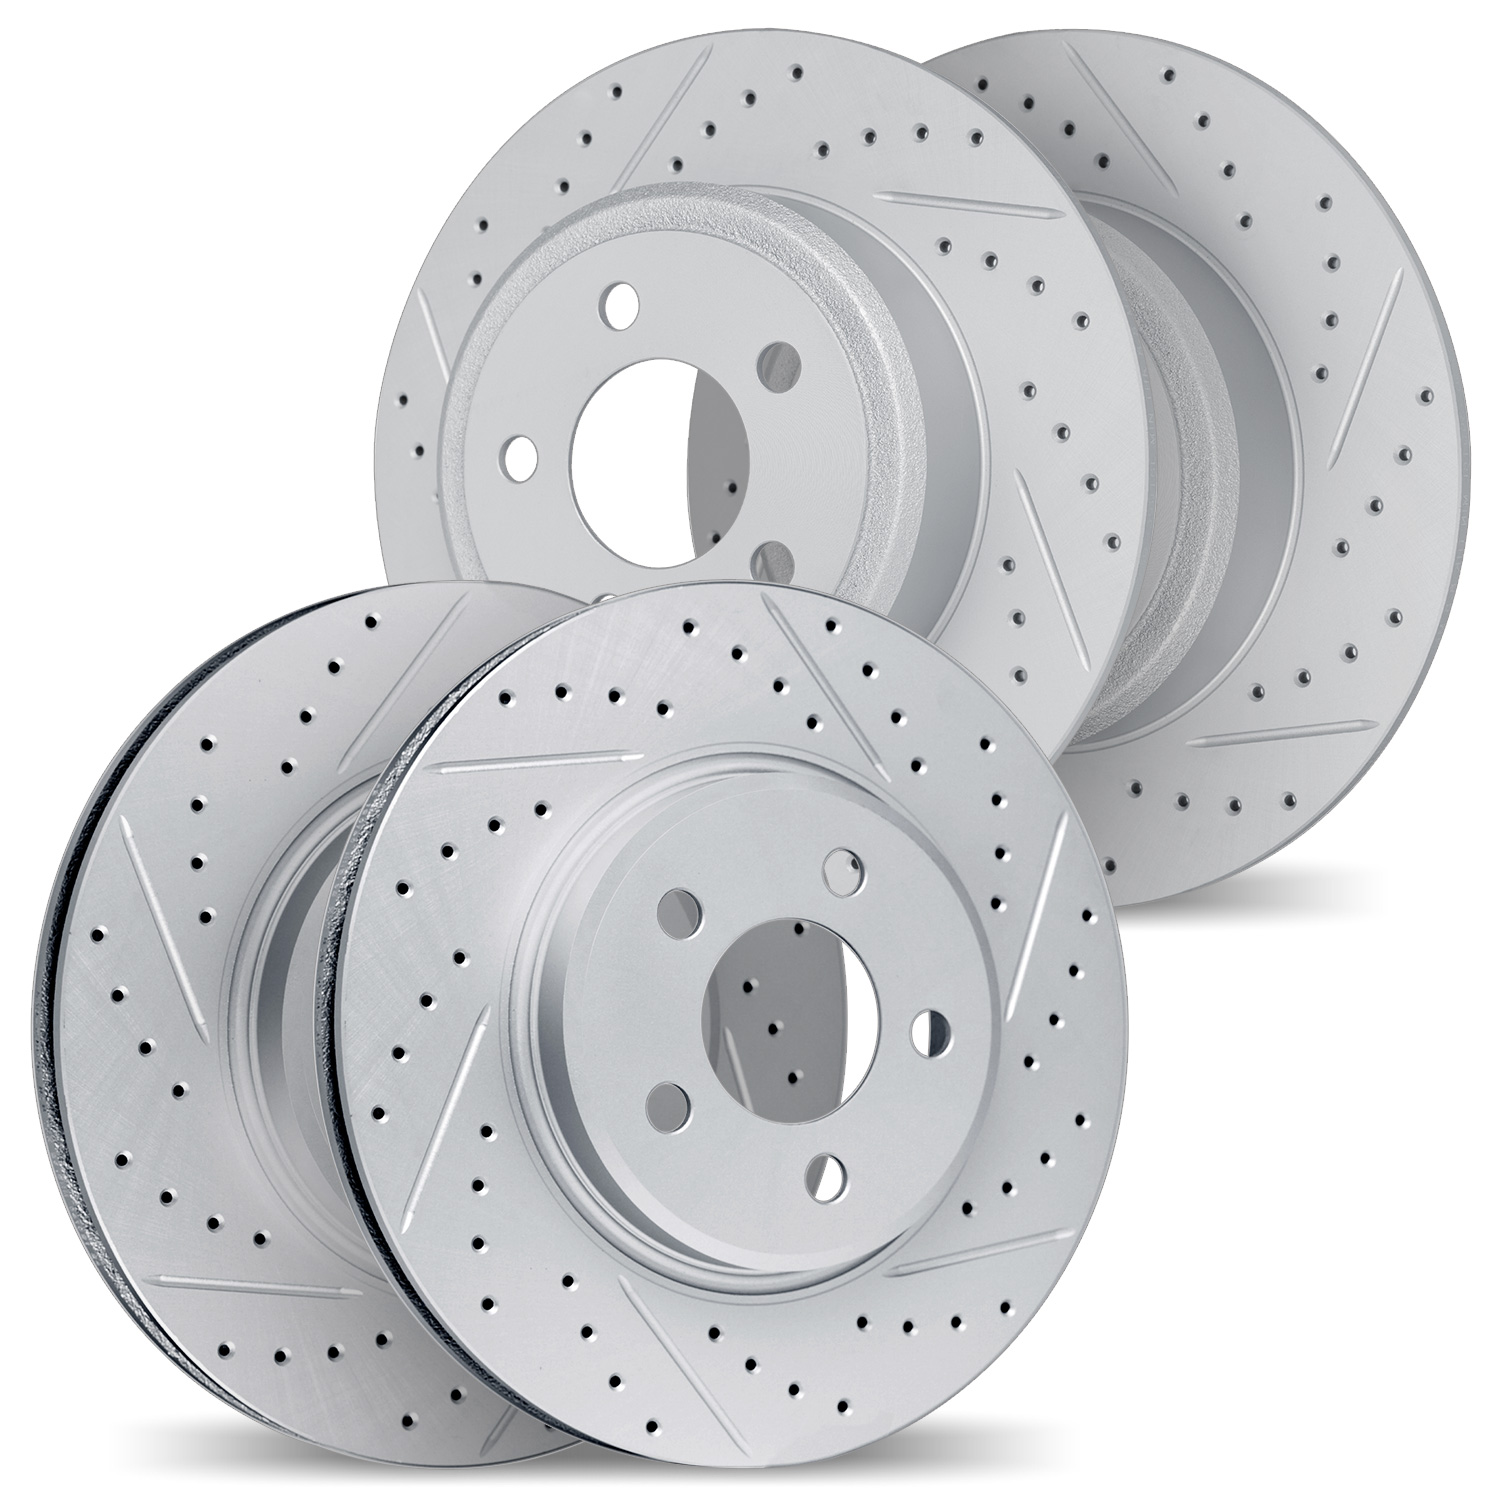 2004-59006 Geoperformance Drilled/Slotted Brake Rotors, 2012-2015 Acura/Honda, Position: Front and Rear